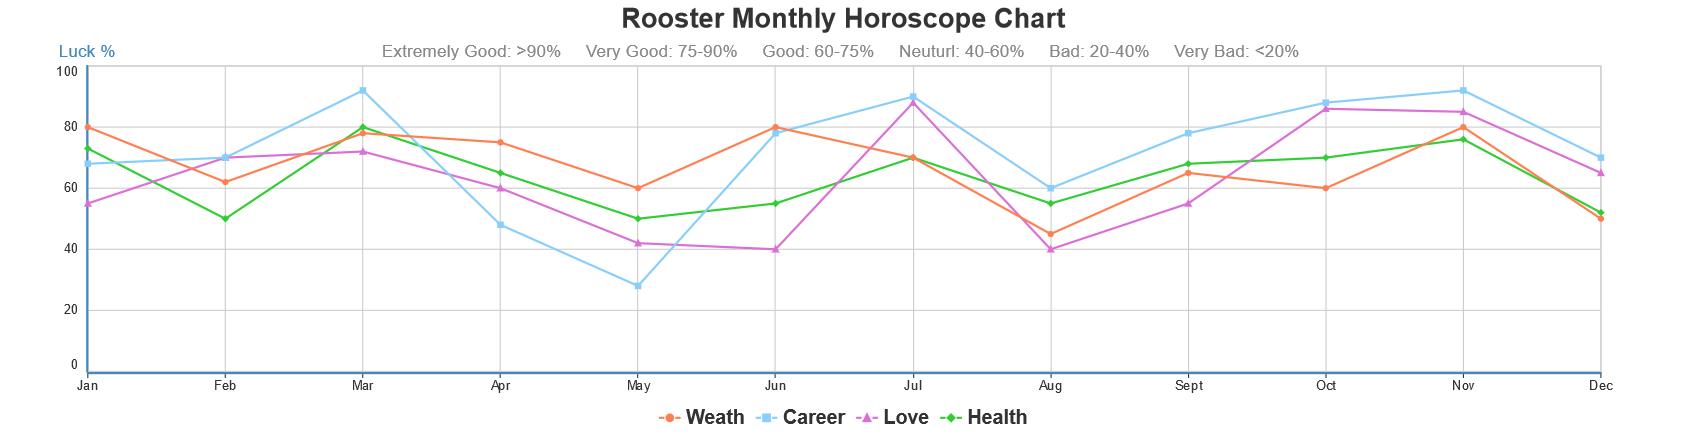 Rooster Your 2020 Chinese Horoscope Free And Complete